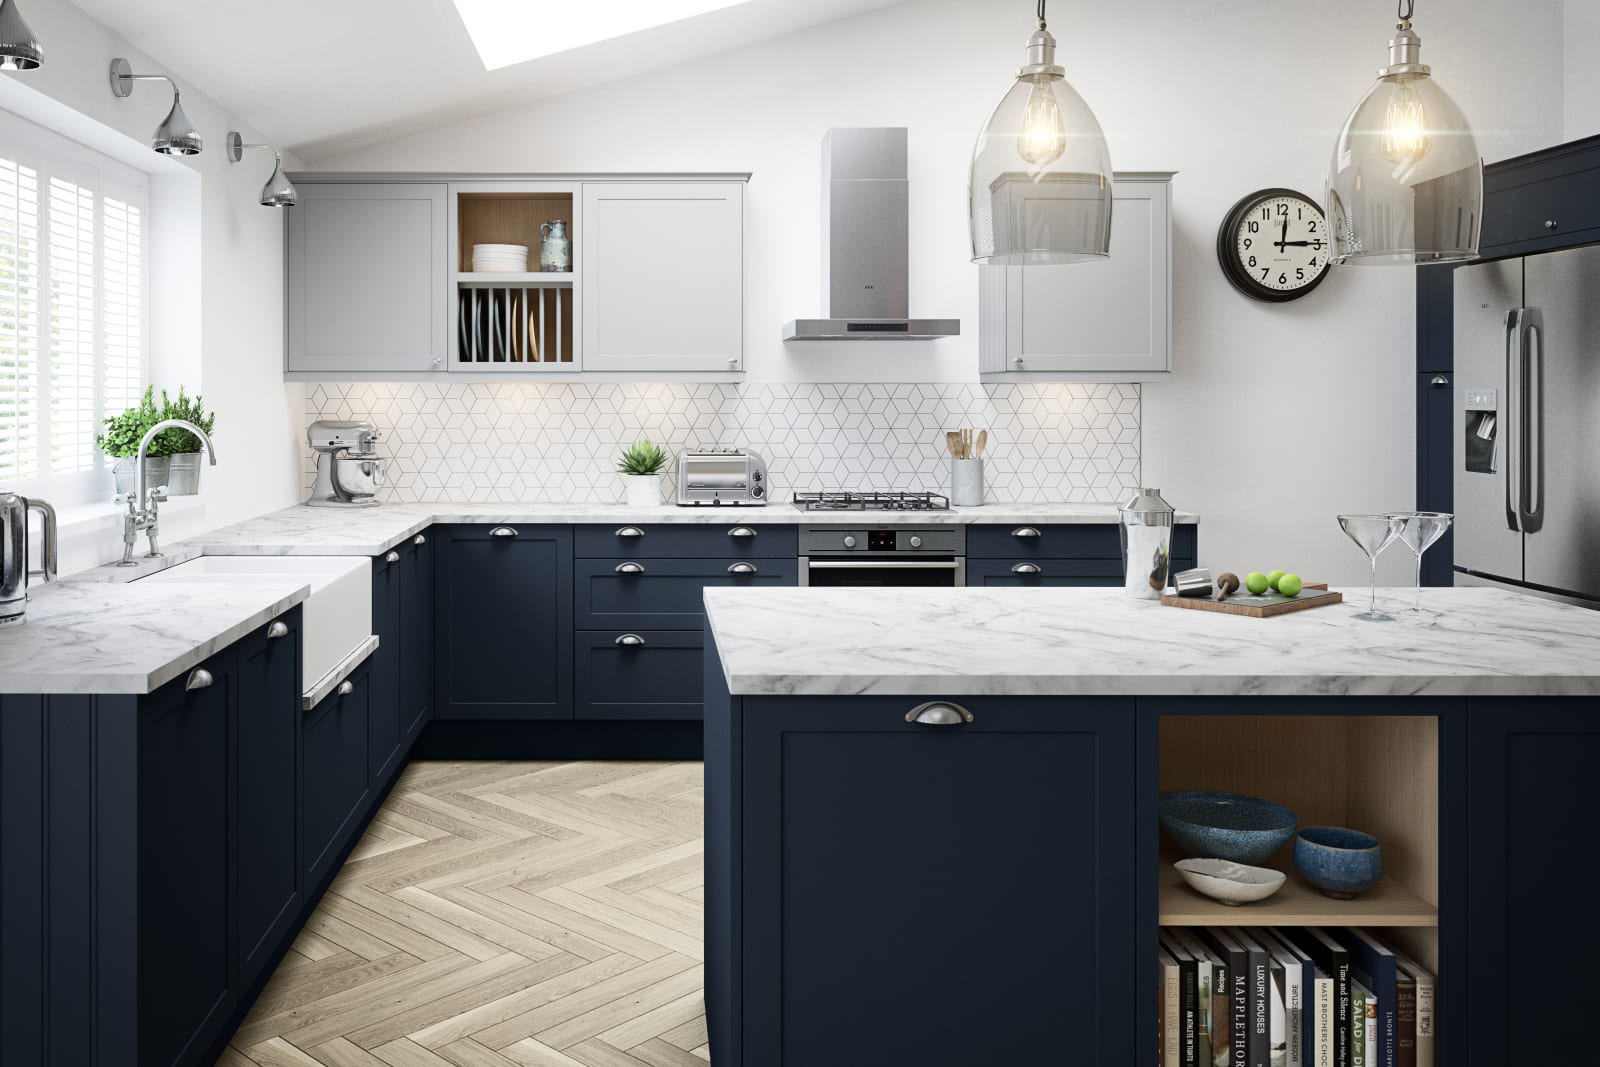 Dunham kitchen by Magnet. Smooth matt finish traditional or modern style available in over 20 colours.